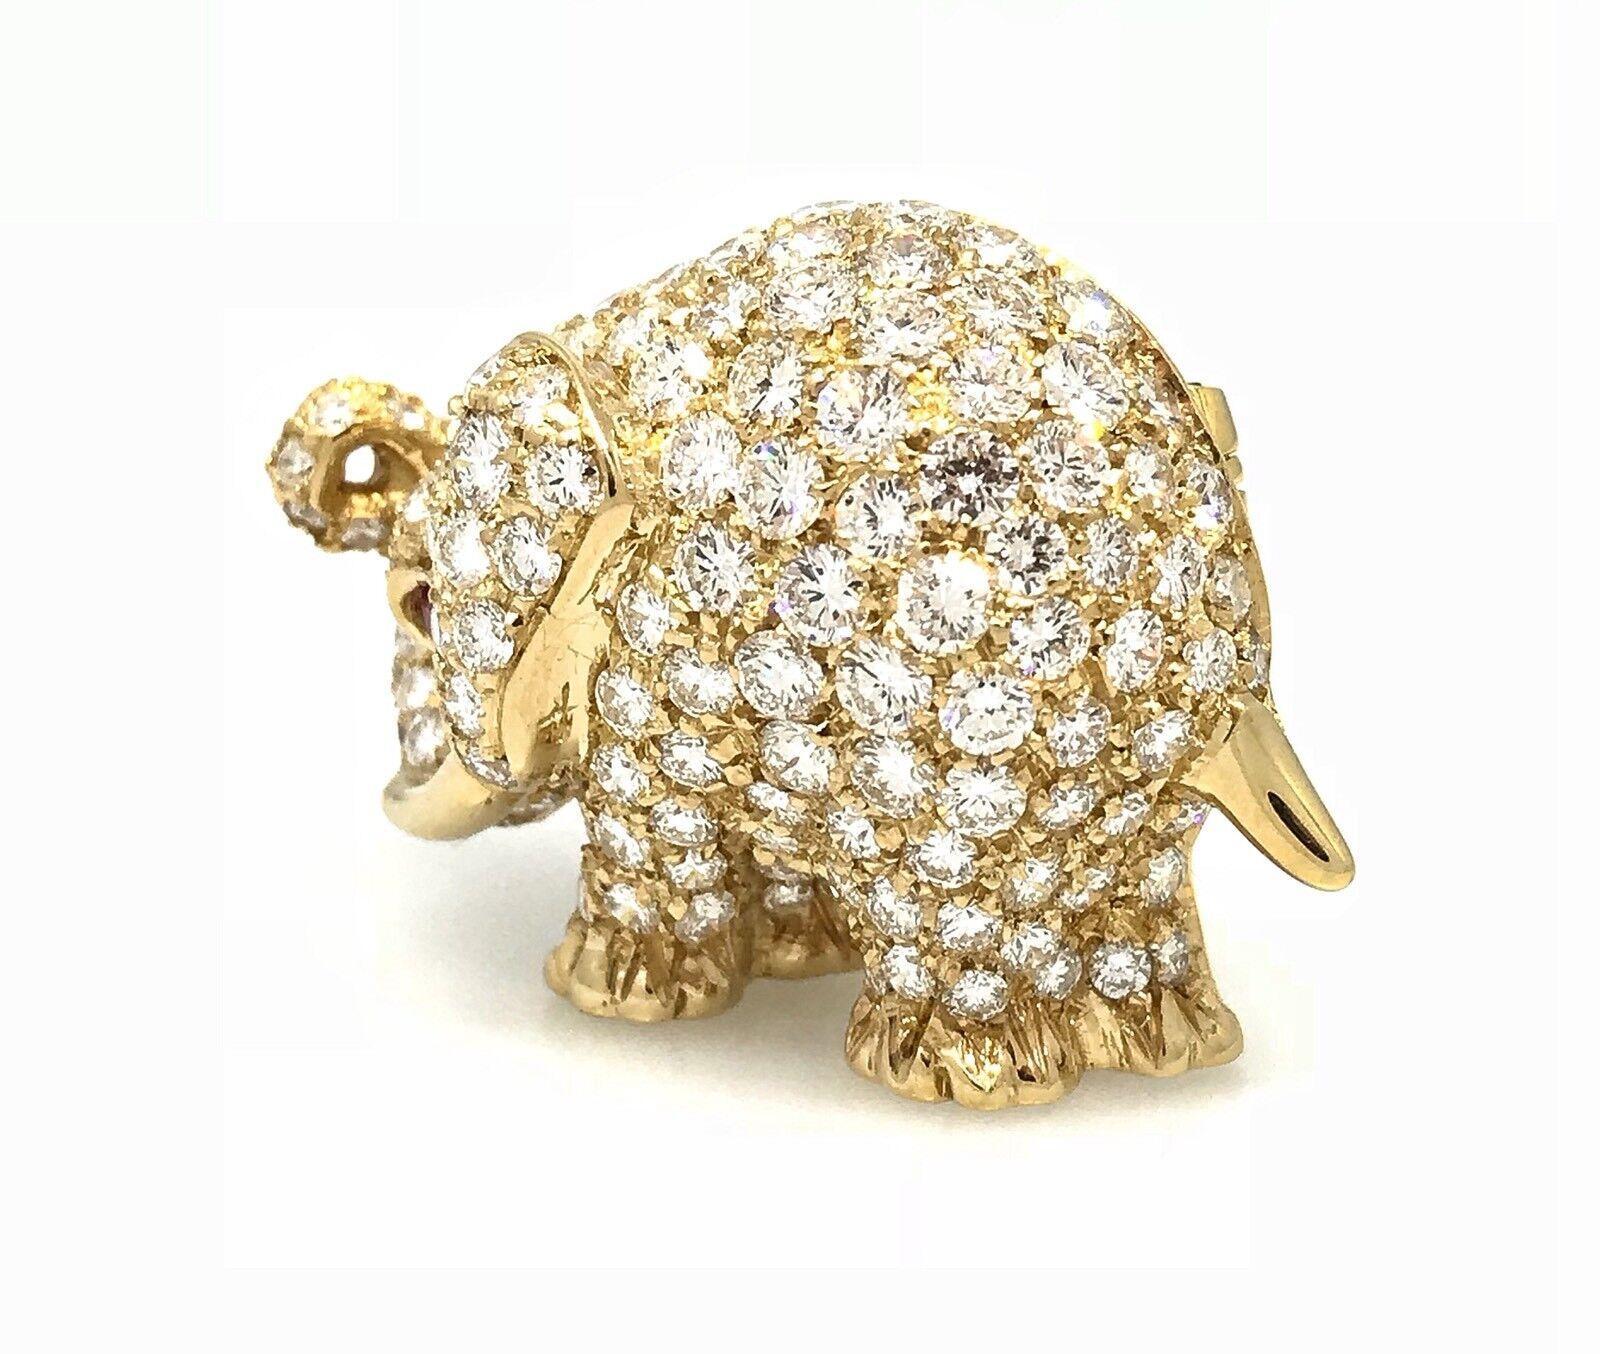 Pavé Diamond Elephant Pin / Brooch 8.00 Carat Total Weight in 18k Yellow Gold In Excellent Condition For Sale In La Jolla, CA